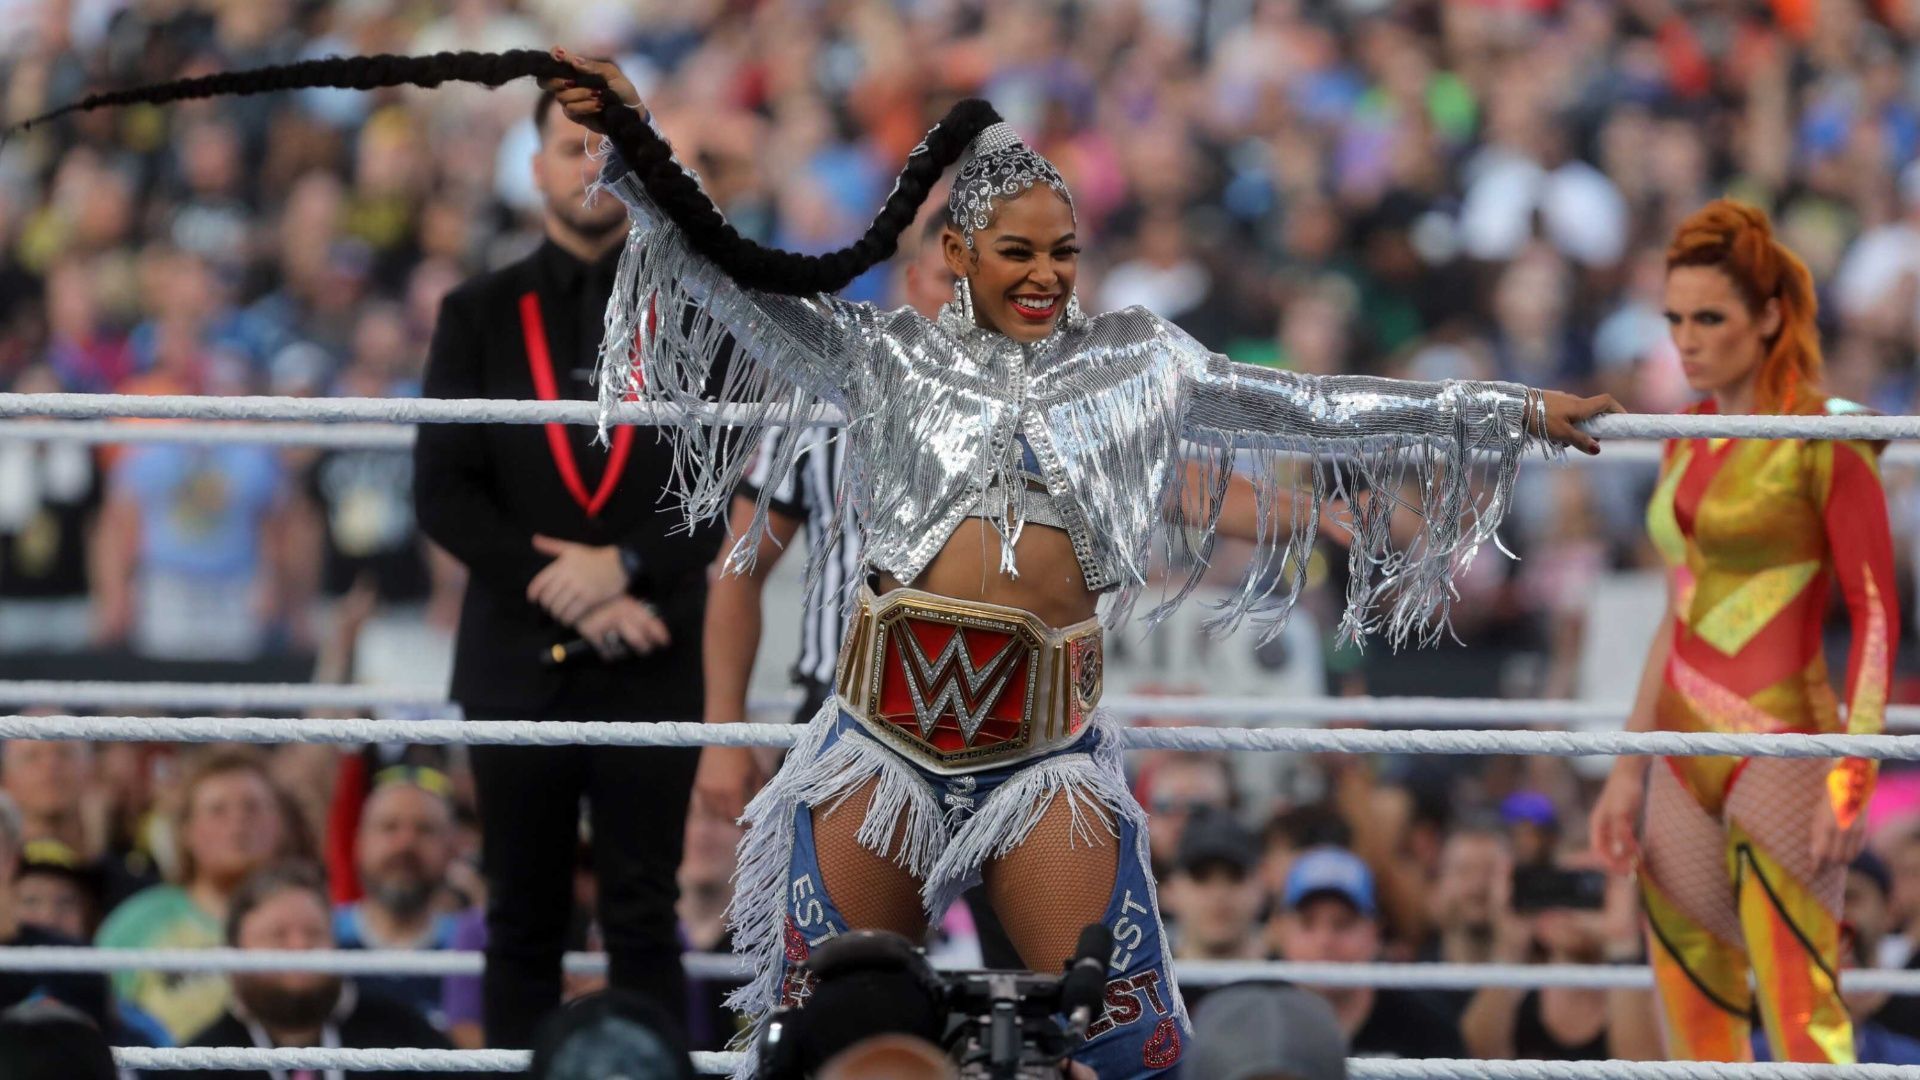 Bianca Belair is the reigning RAW Women